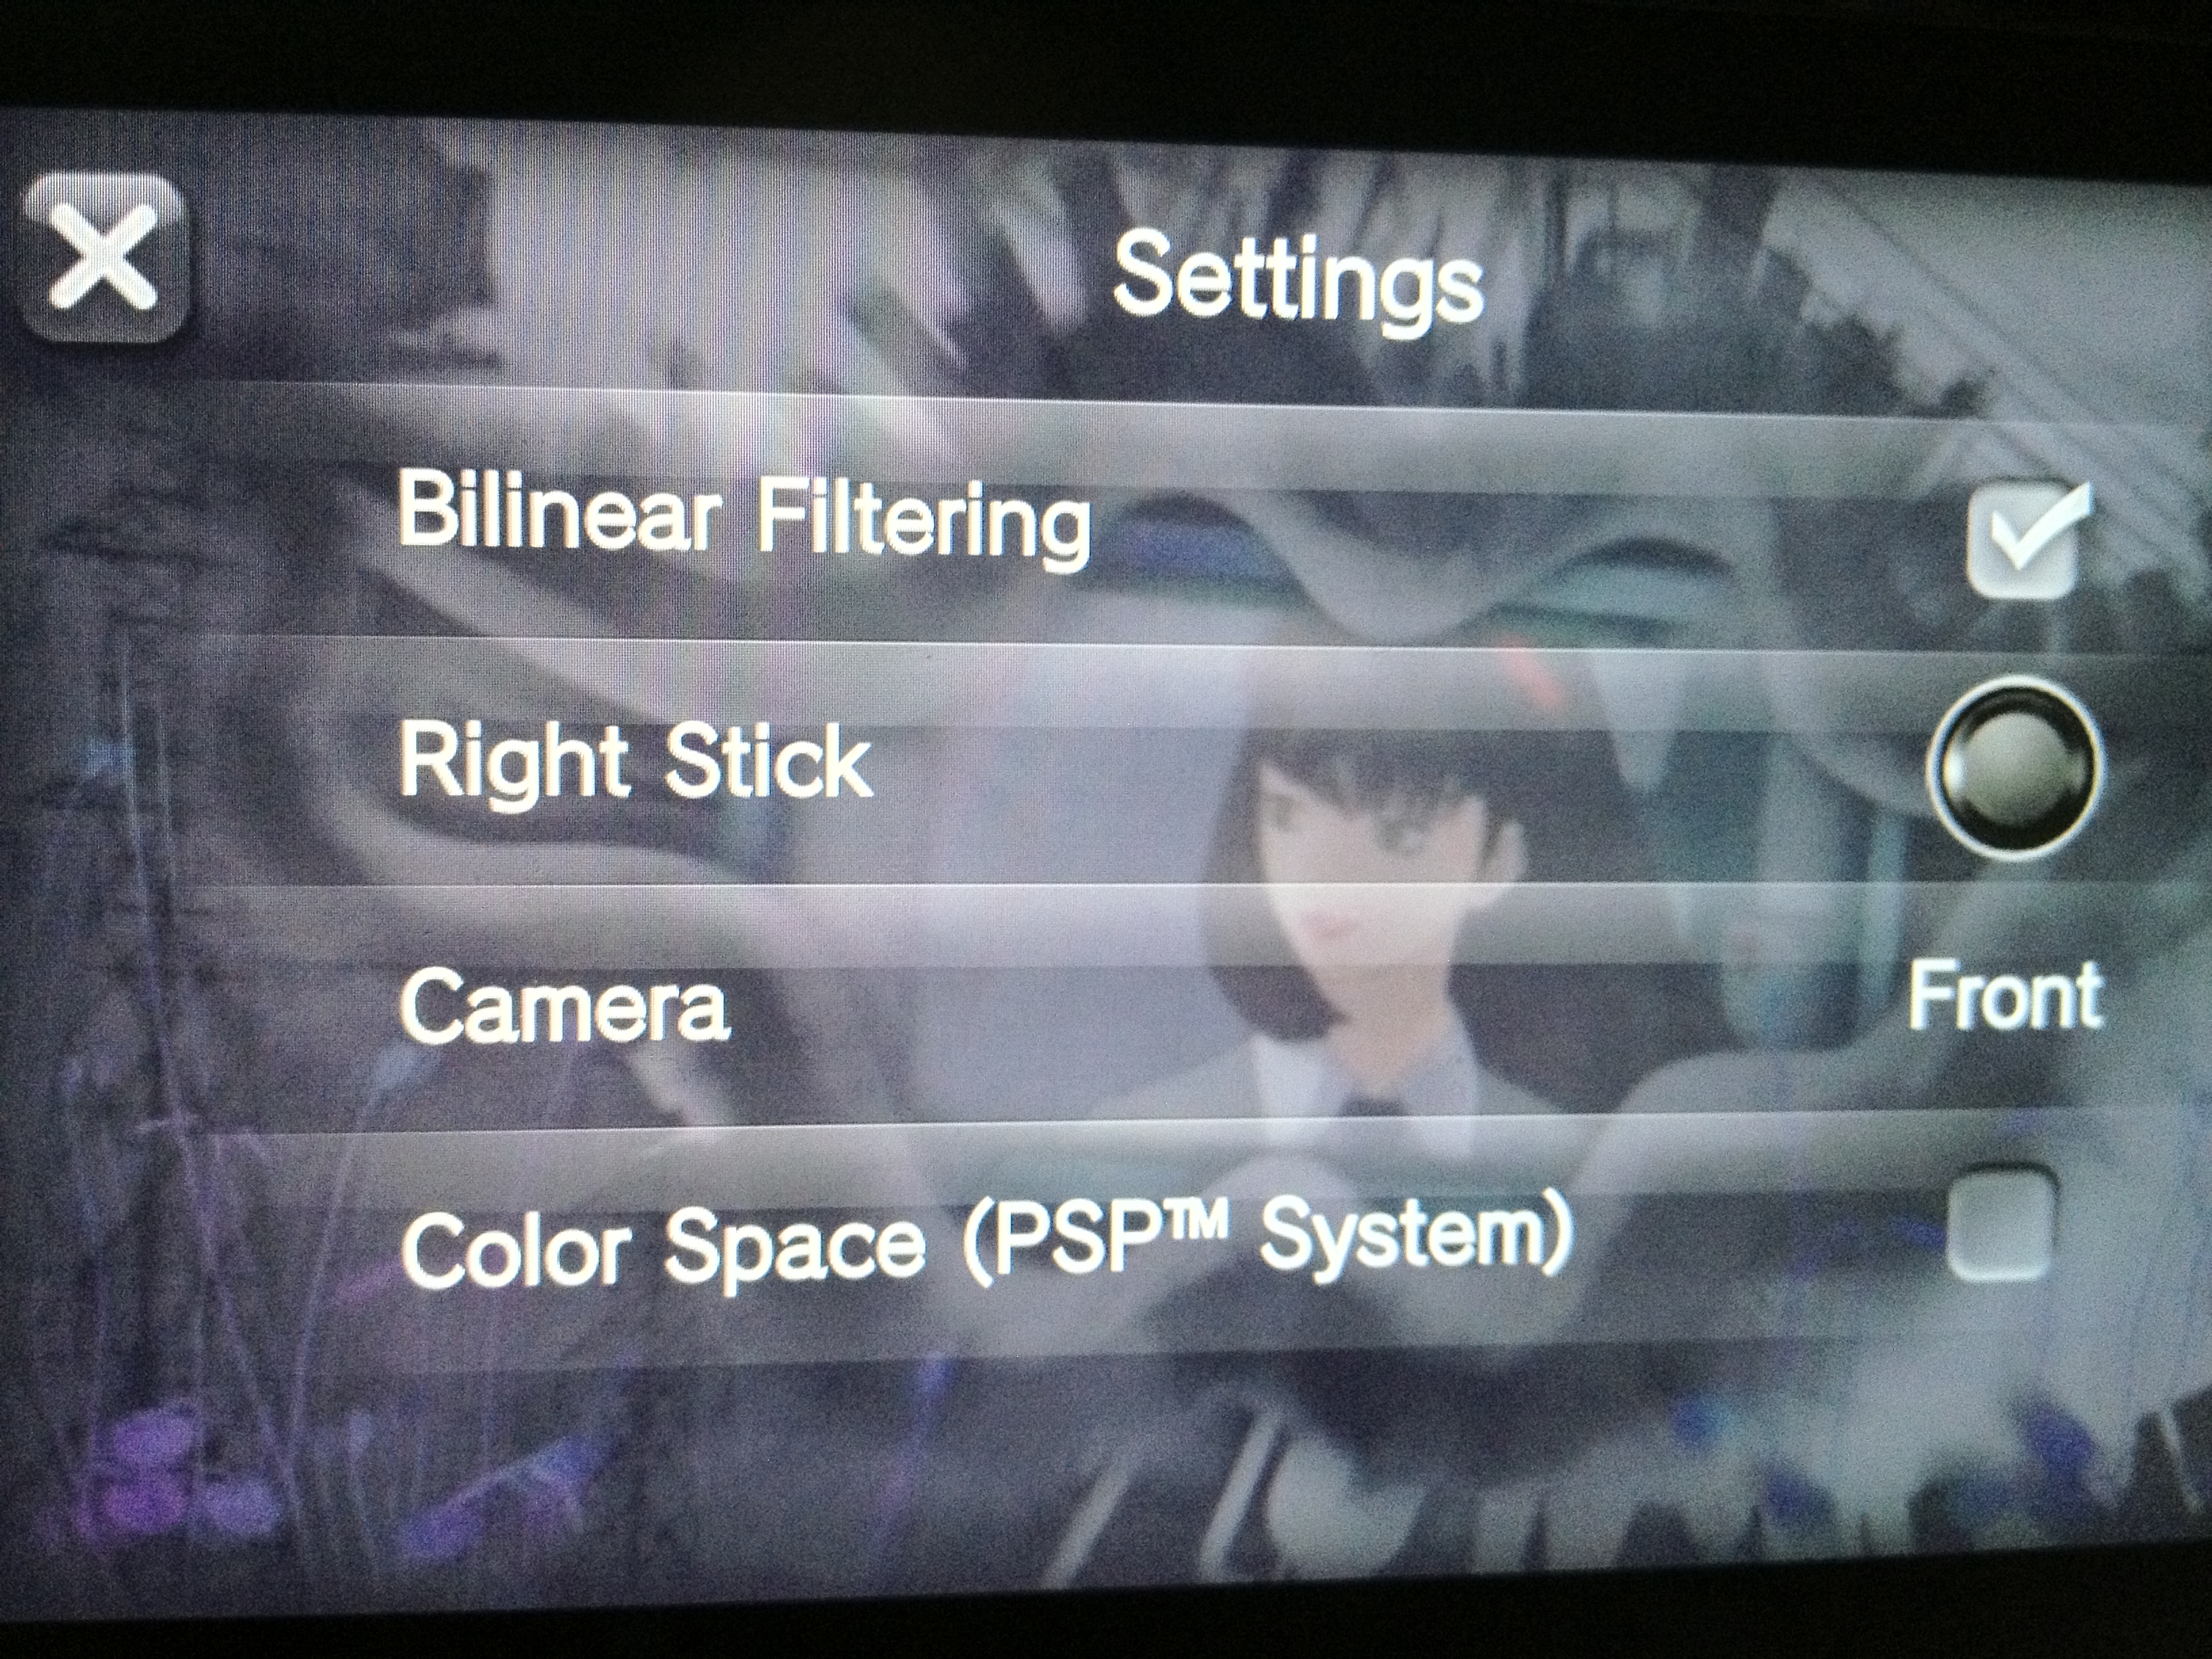 PlayStation Vita: How to Turn On Bilinear Filter When Playing PSP Games